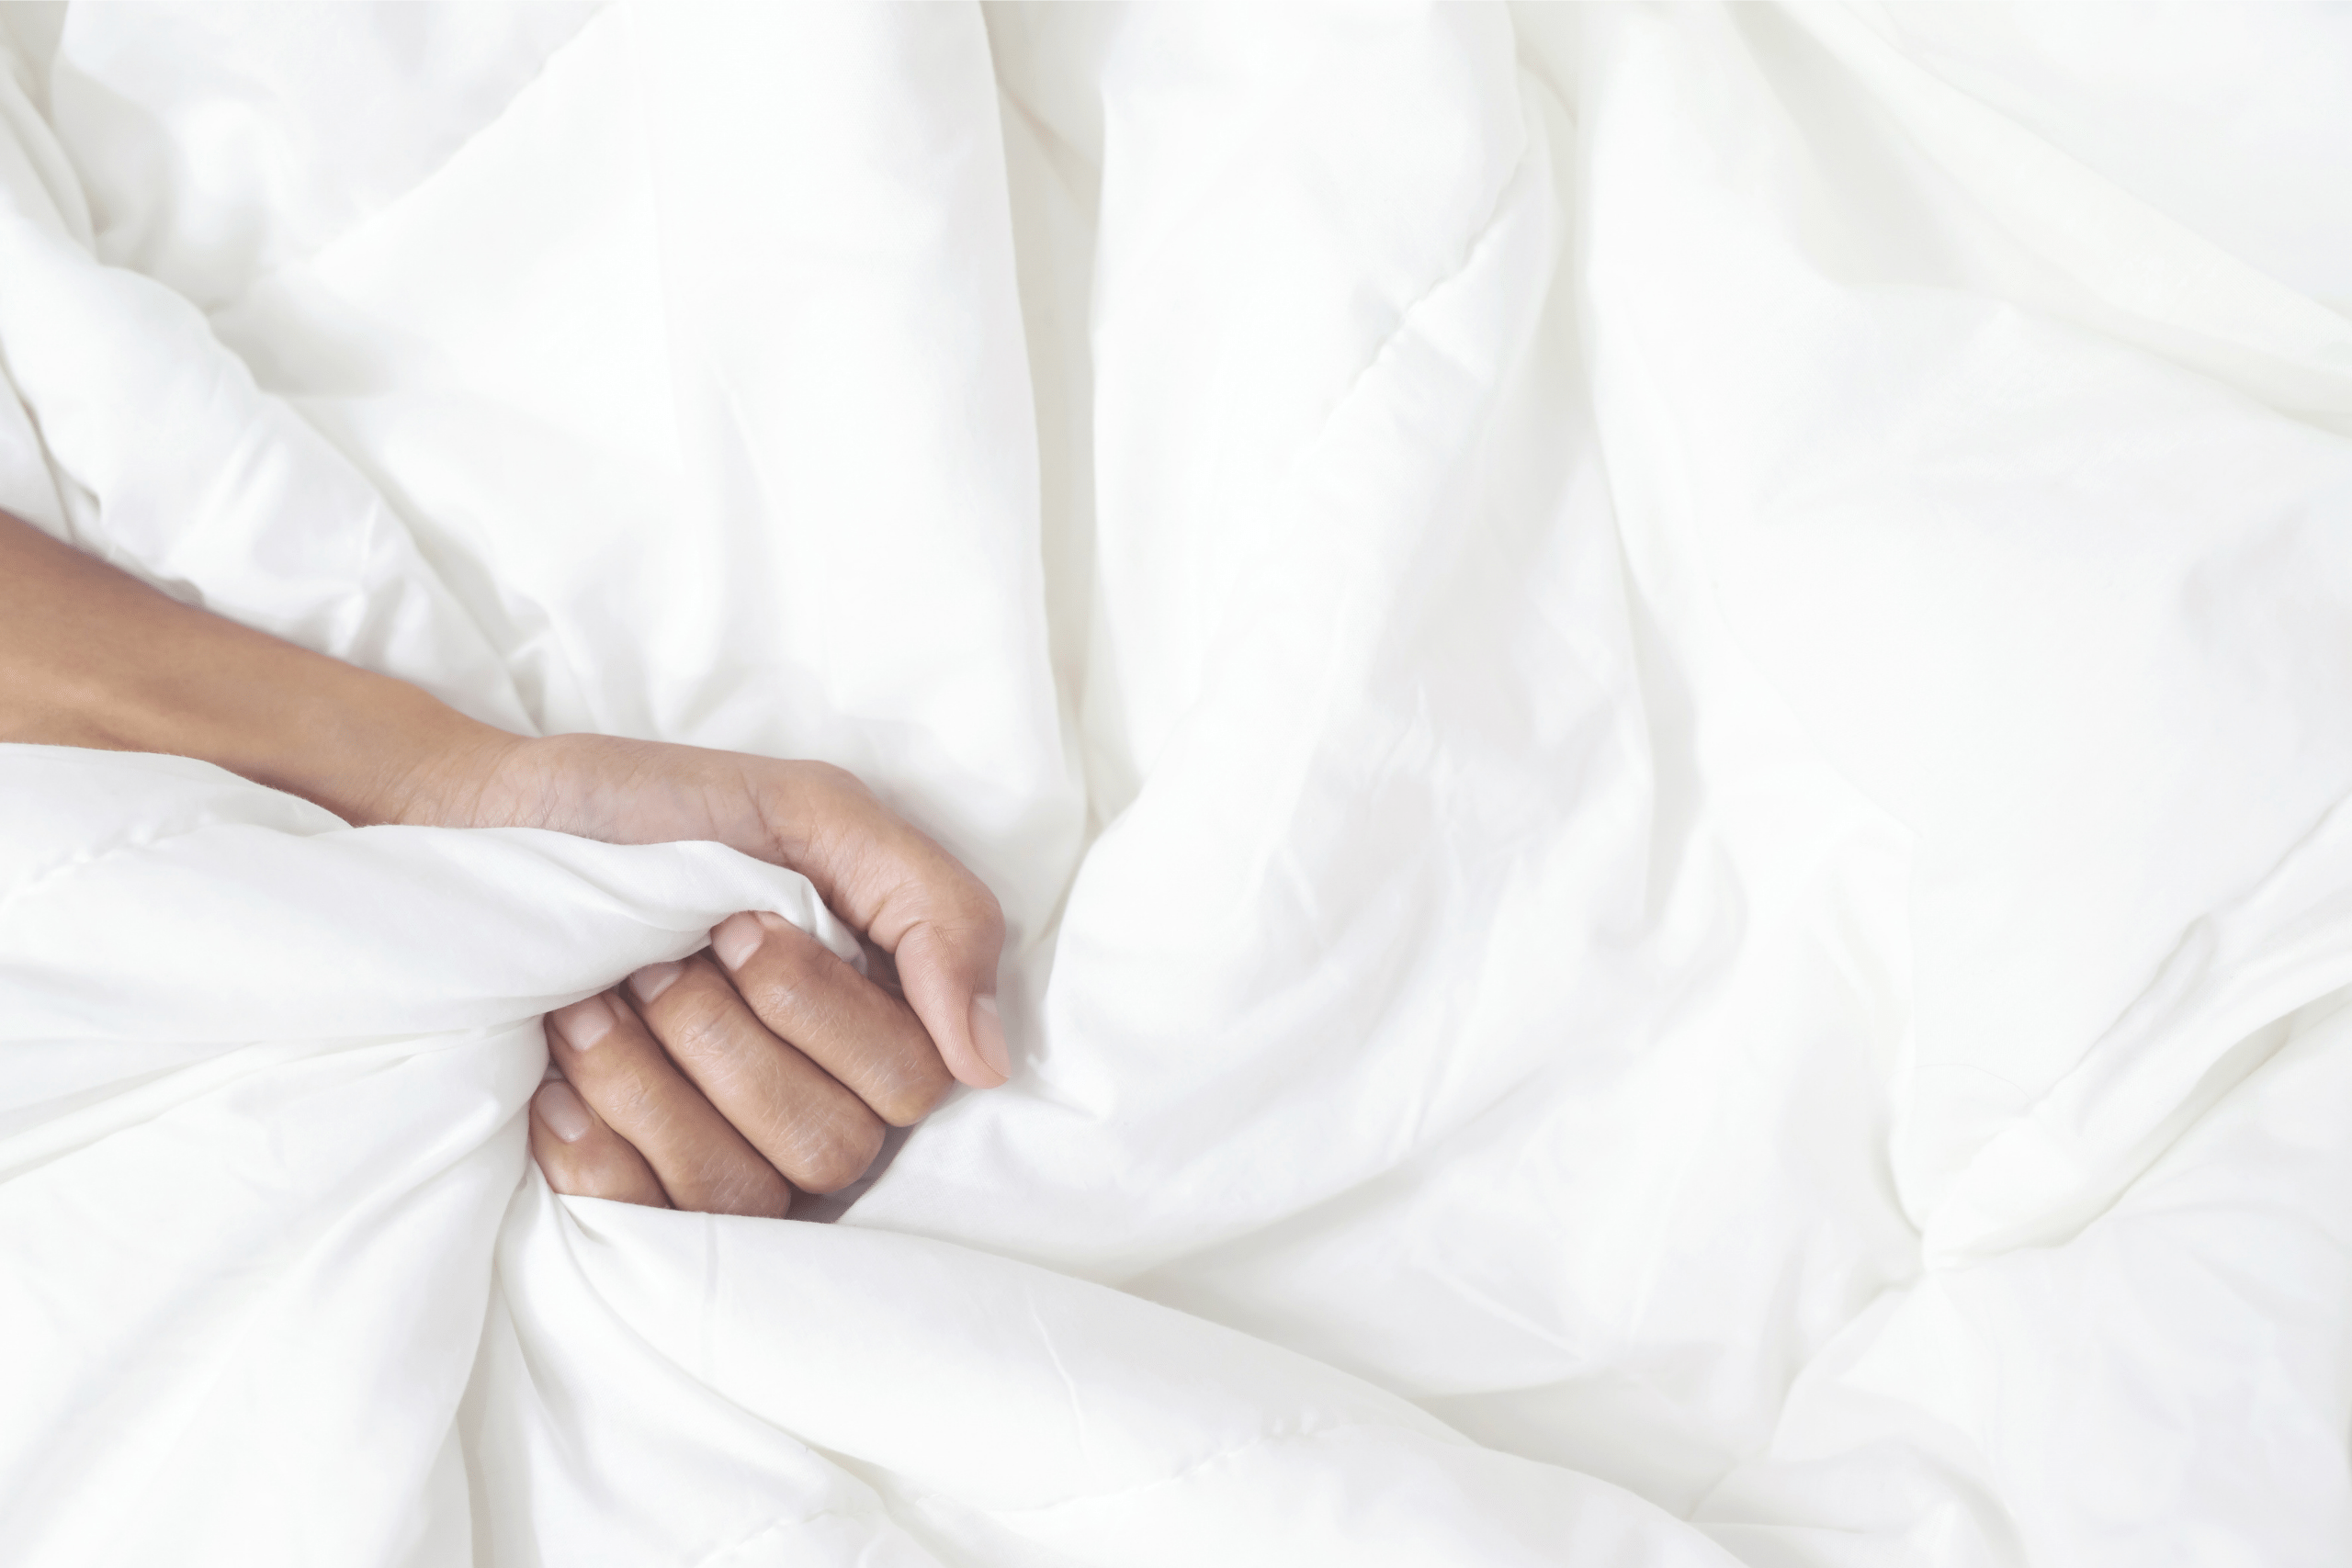 What are the most comfortable sheets? White bed sheets gripped by a sleepy hand.